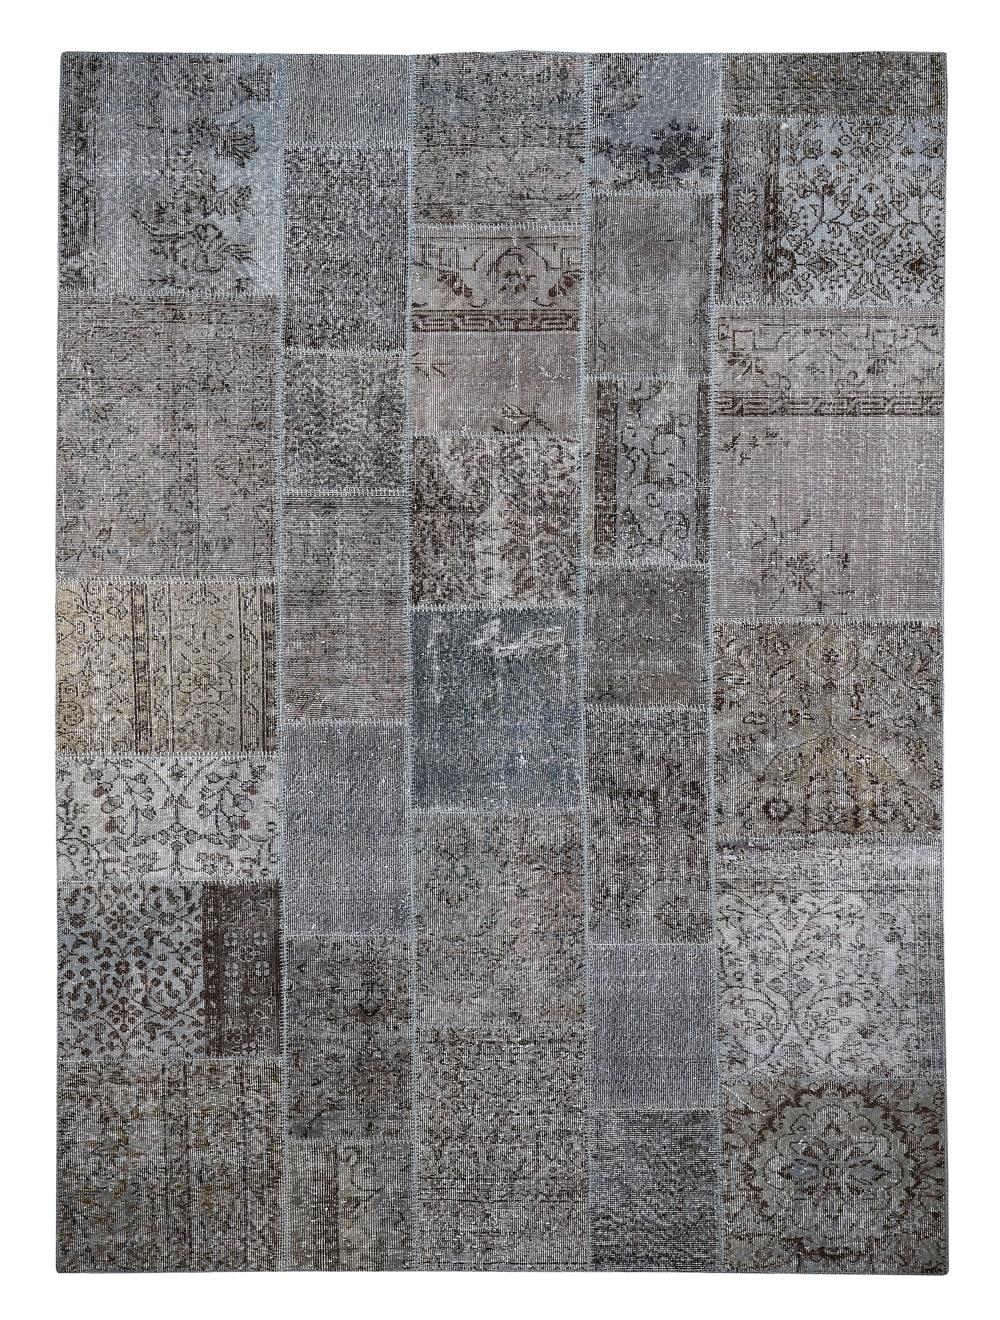 Grey Vintage carpet by Massimo Copenhagen
Handknotted
Materials: 100% Wool
Dimensions: W 300 x H 400 cm
Available colors: Natural Light, natural strong, grey.
Other dimensions are available: 80x250 cm, 140x200 cm, 170x240 cm, 200x300 cm,